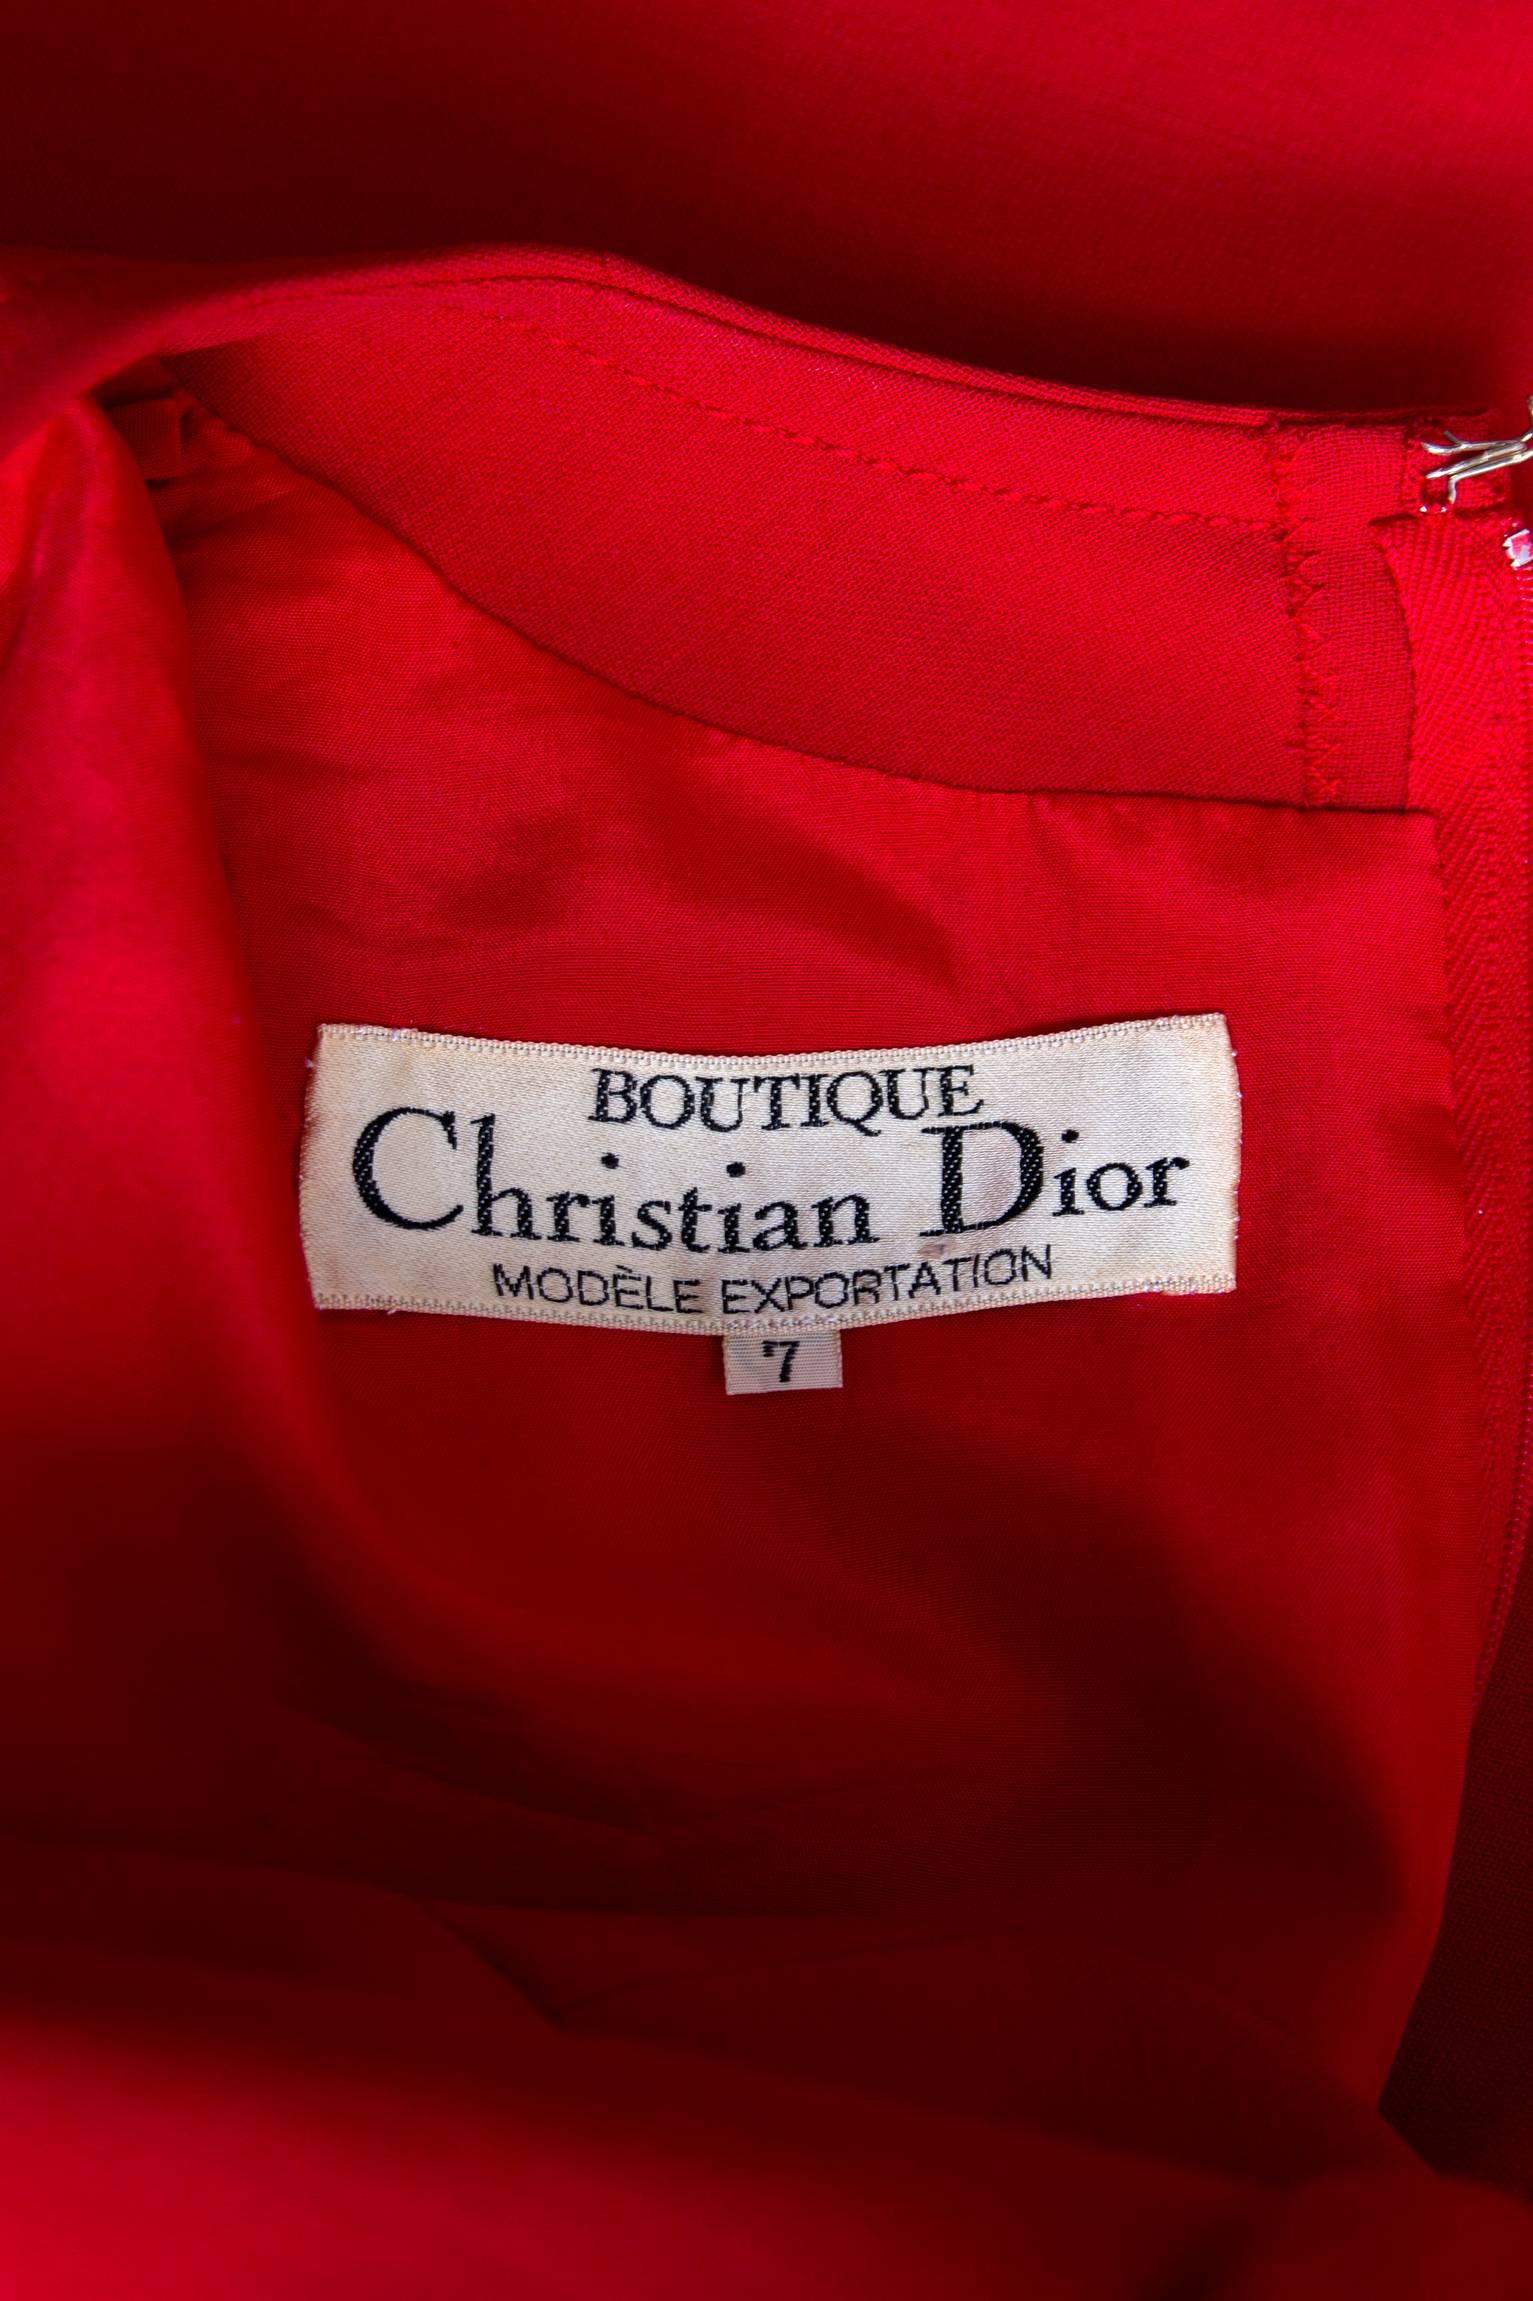 A stunning 1960s Christian Dior bright red a-line wool dress with long tapered sleeves and a round neckline. The little red dress features panel detailing down the from and has two small patch pockets situated on the bust area. The dress is fully